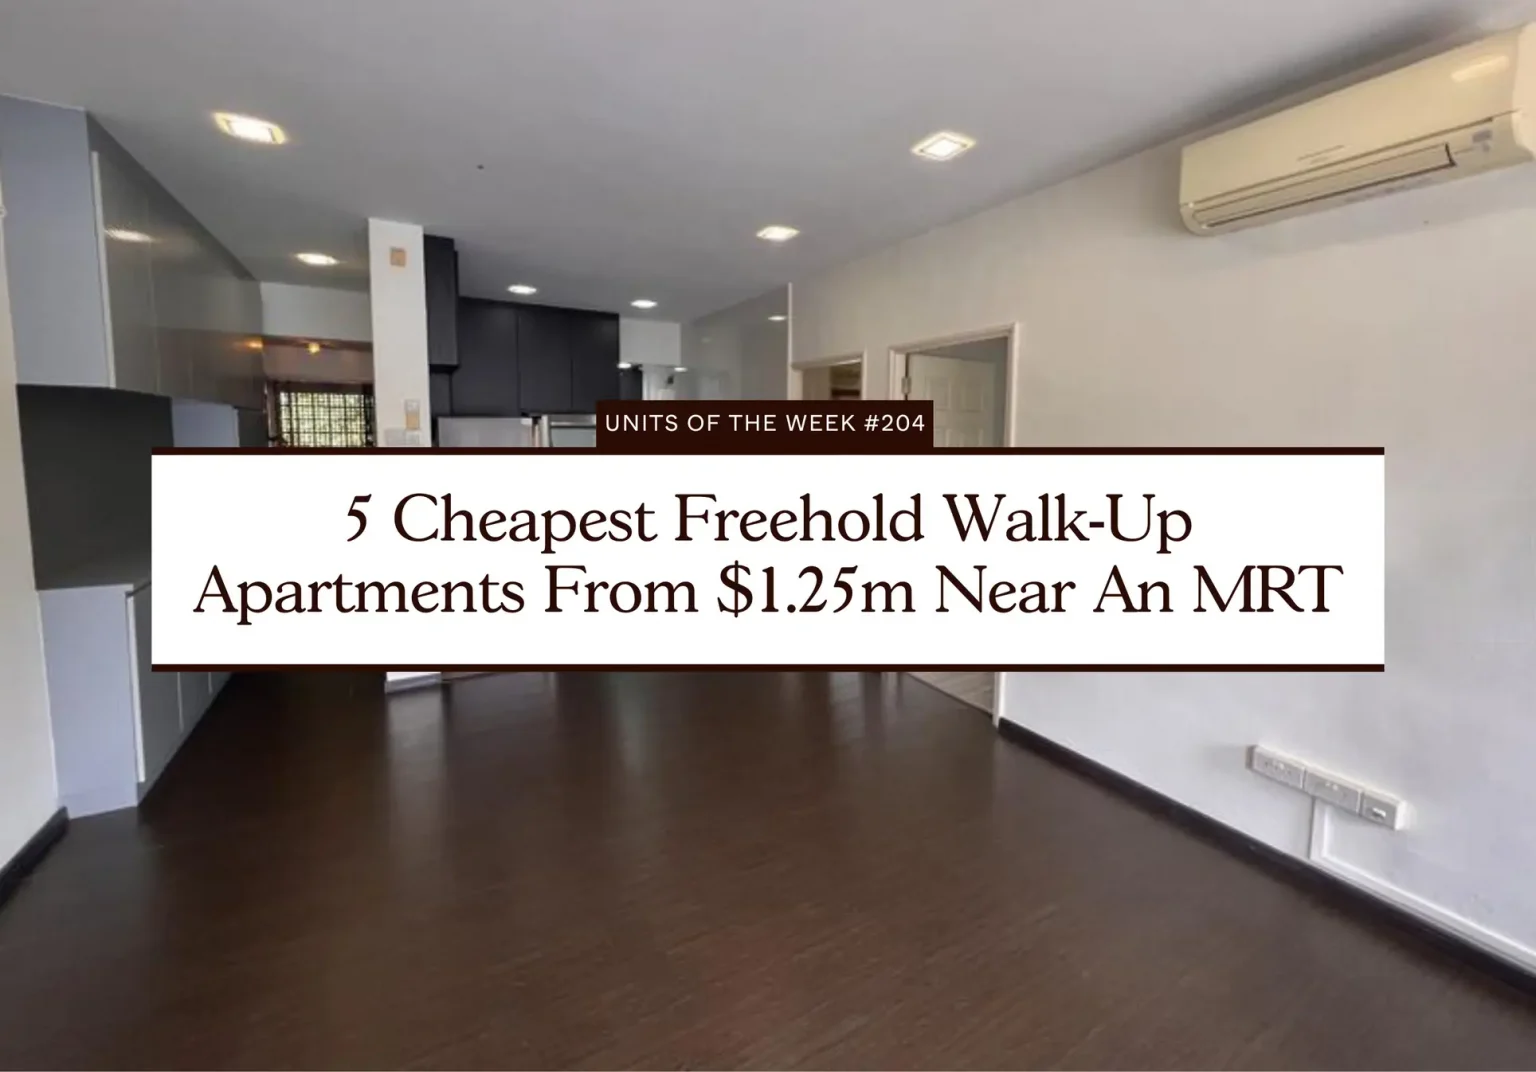 5 Cheapest Freehold Walk Up Apartments From 1.25m Near An MRT